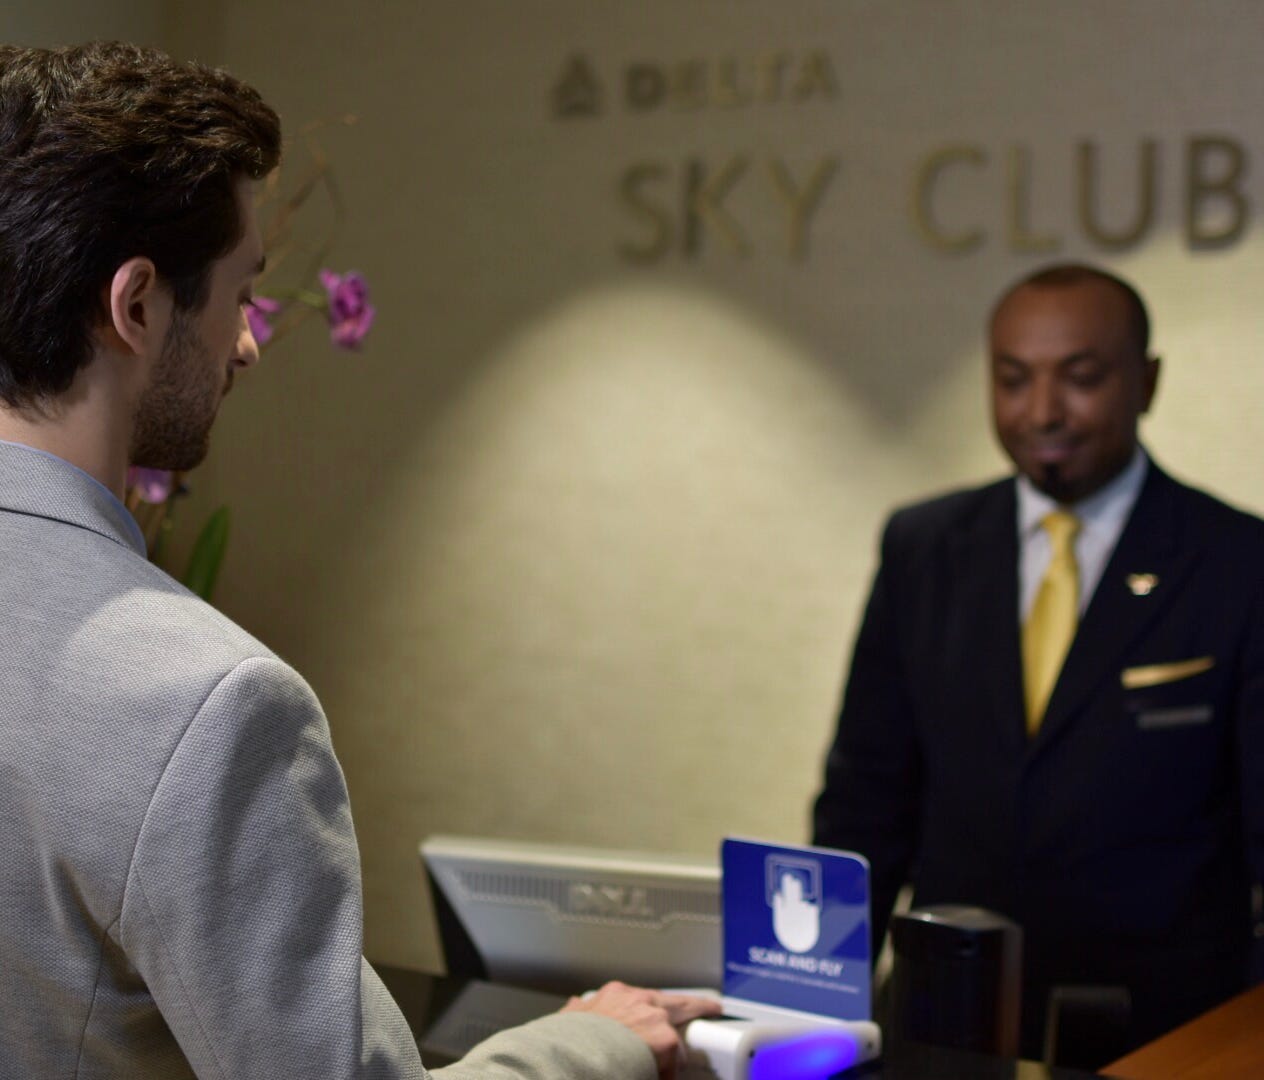 This image provided by Delta shows a biometric fingerprint scan being used to confirm entry at one of the carrier's frequent-flier lounges.